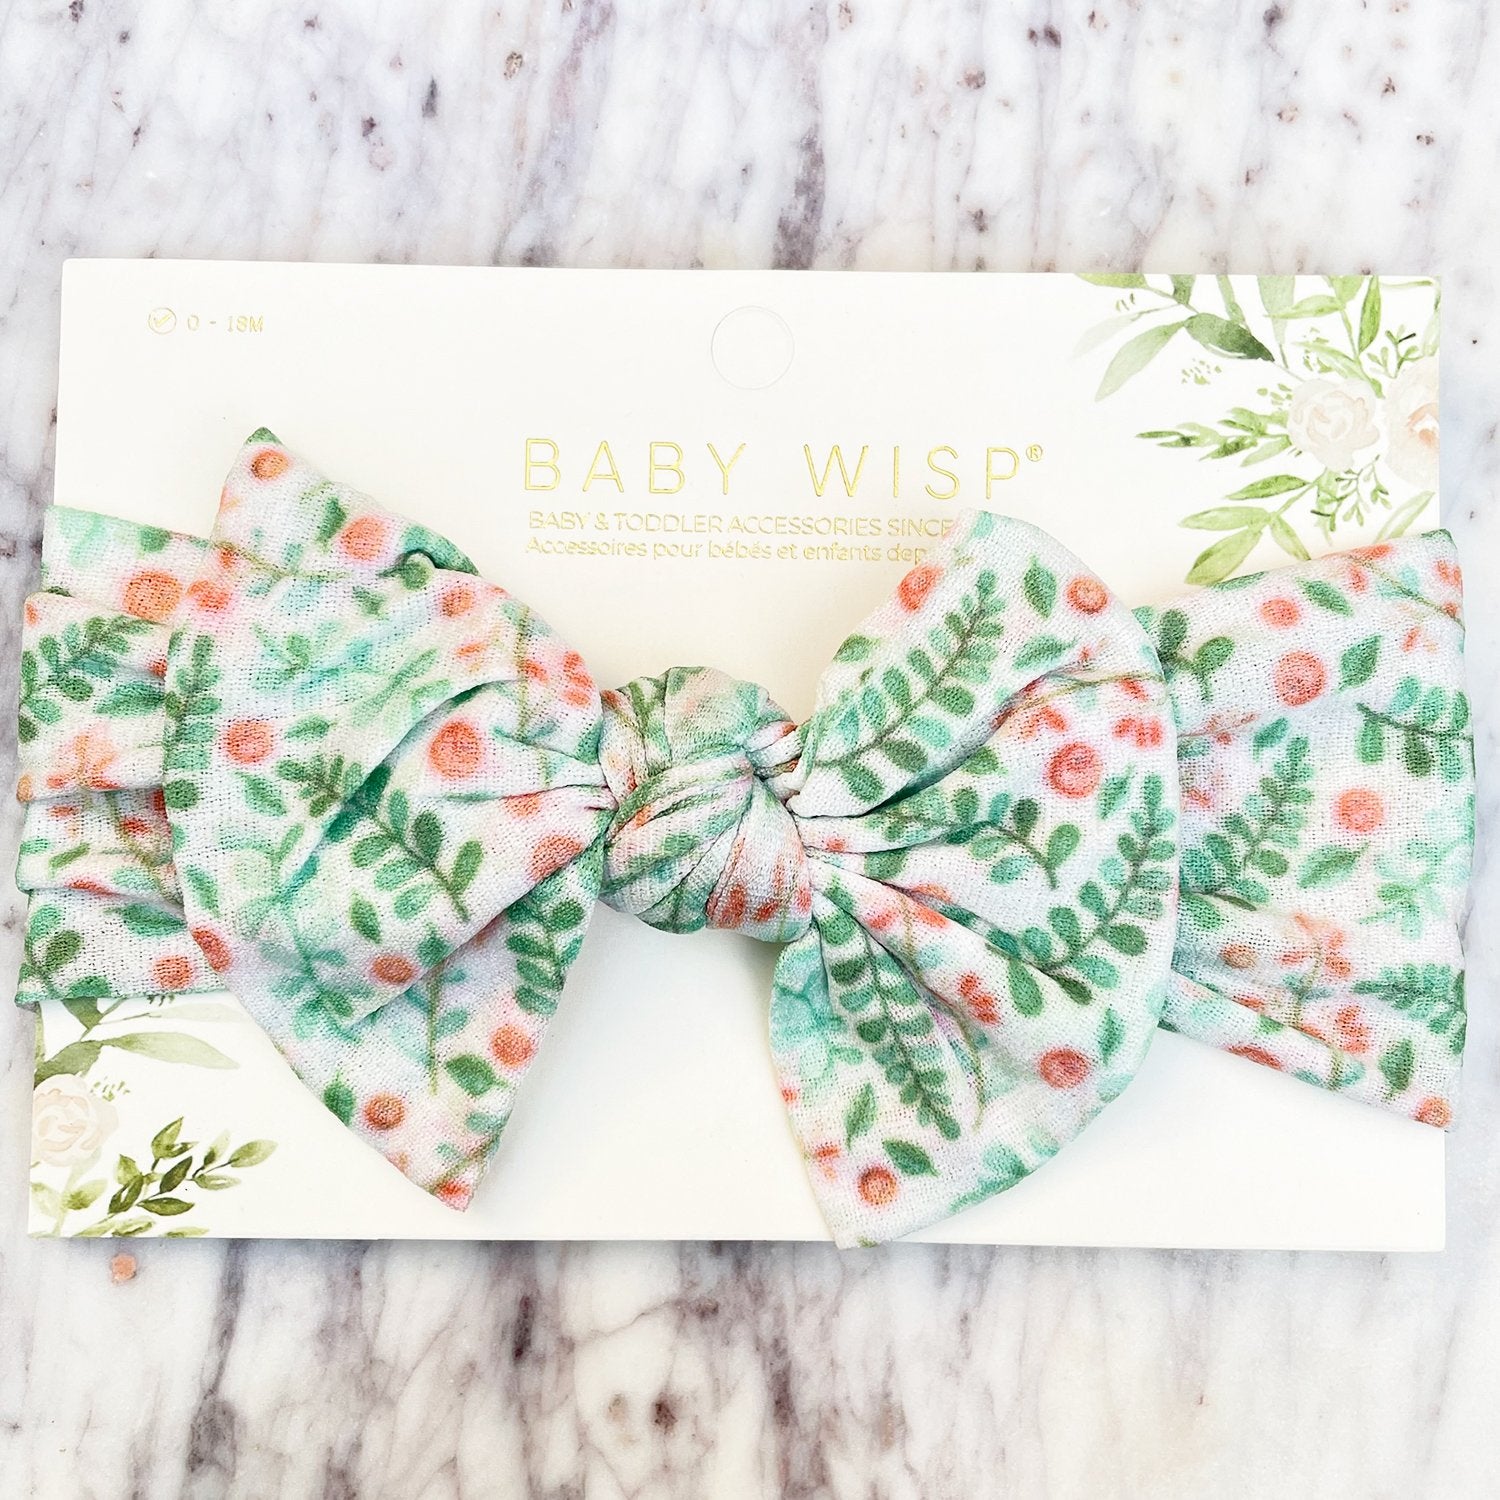 Infant Headwrap Nylon Bow Floral Headband - Green Floral Baby Wisp